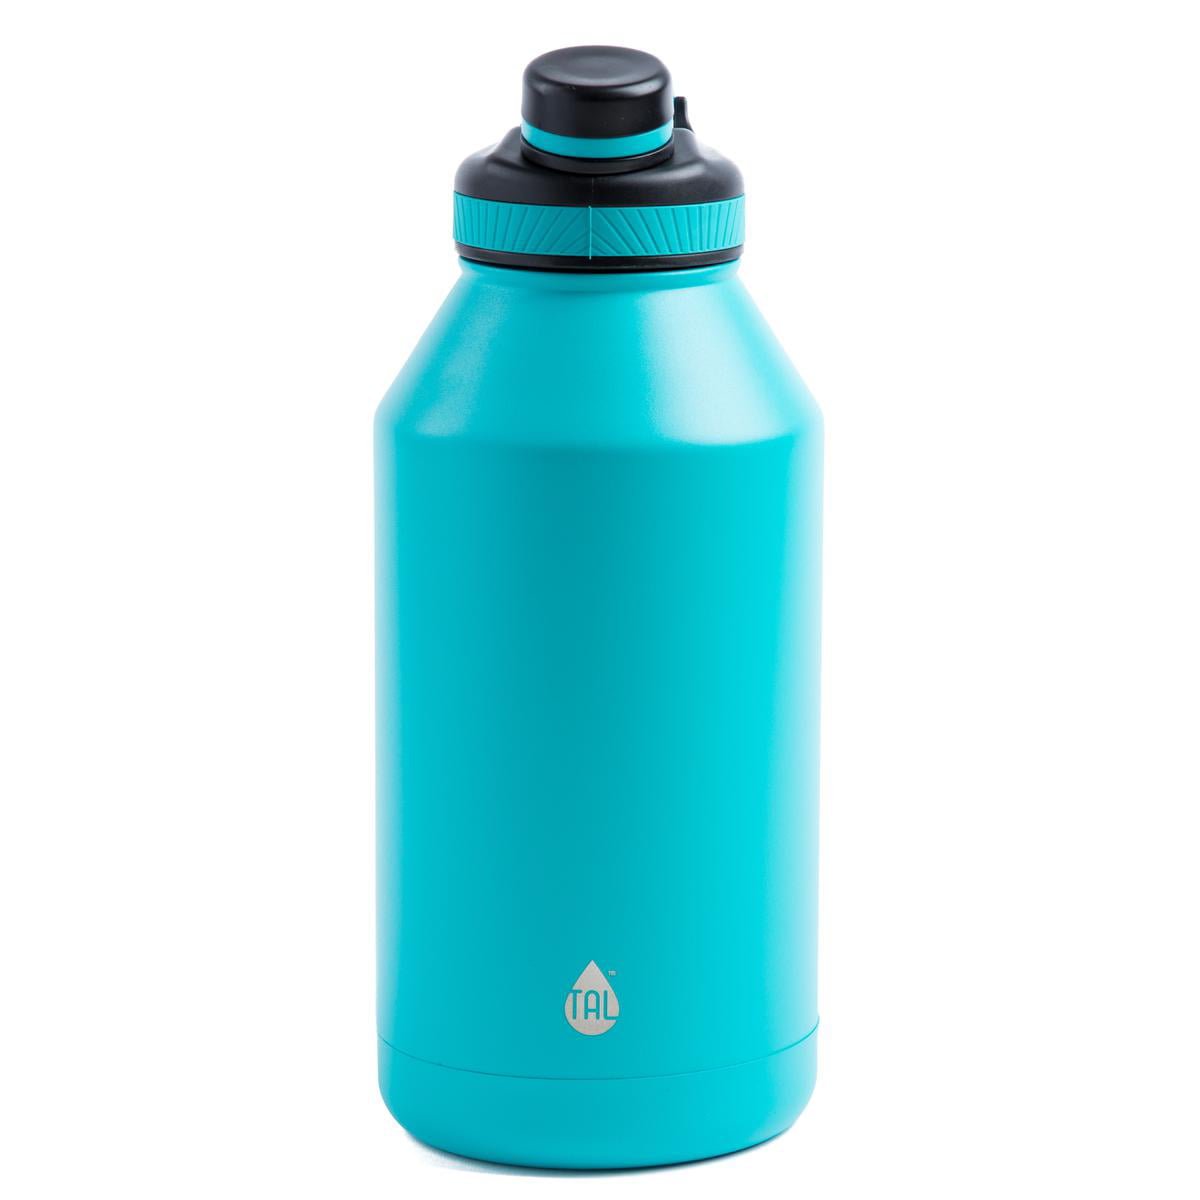 Tal Stainless Steel 64 Oz. Double Wall Vacuum Insulated Teal Ranger Pro 64 Oz Stainless Steel Water Bottle Walmart